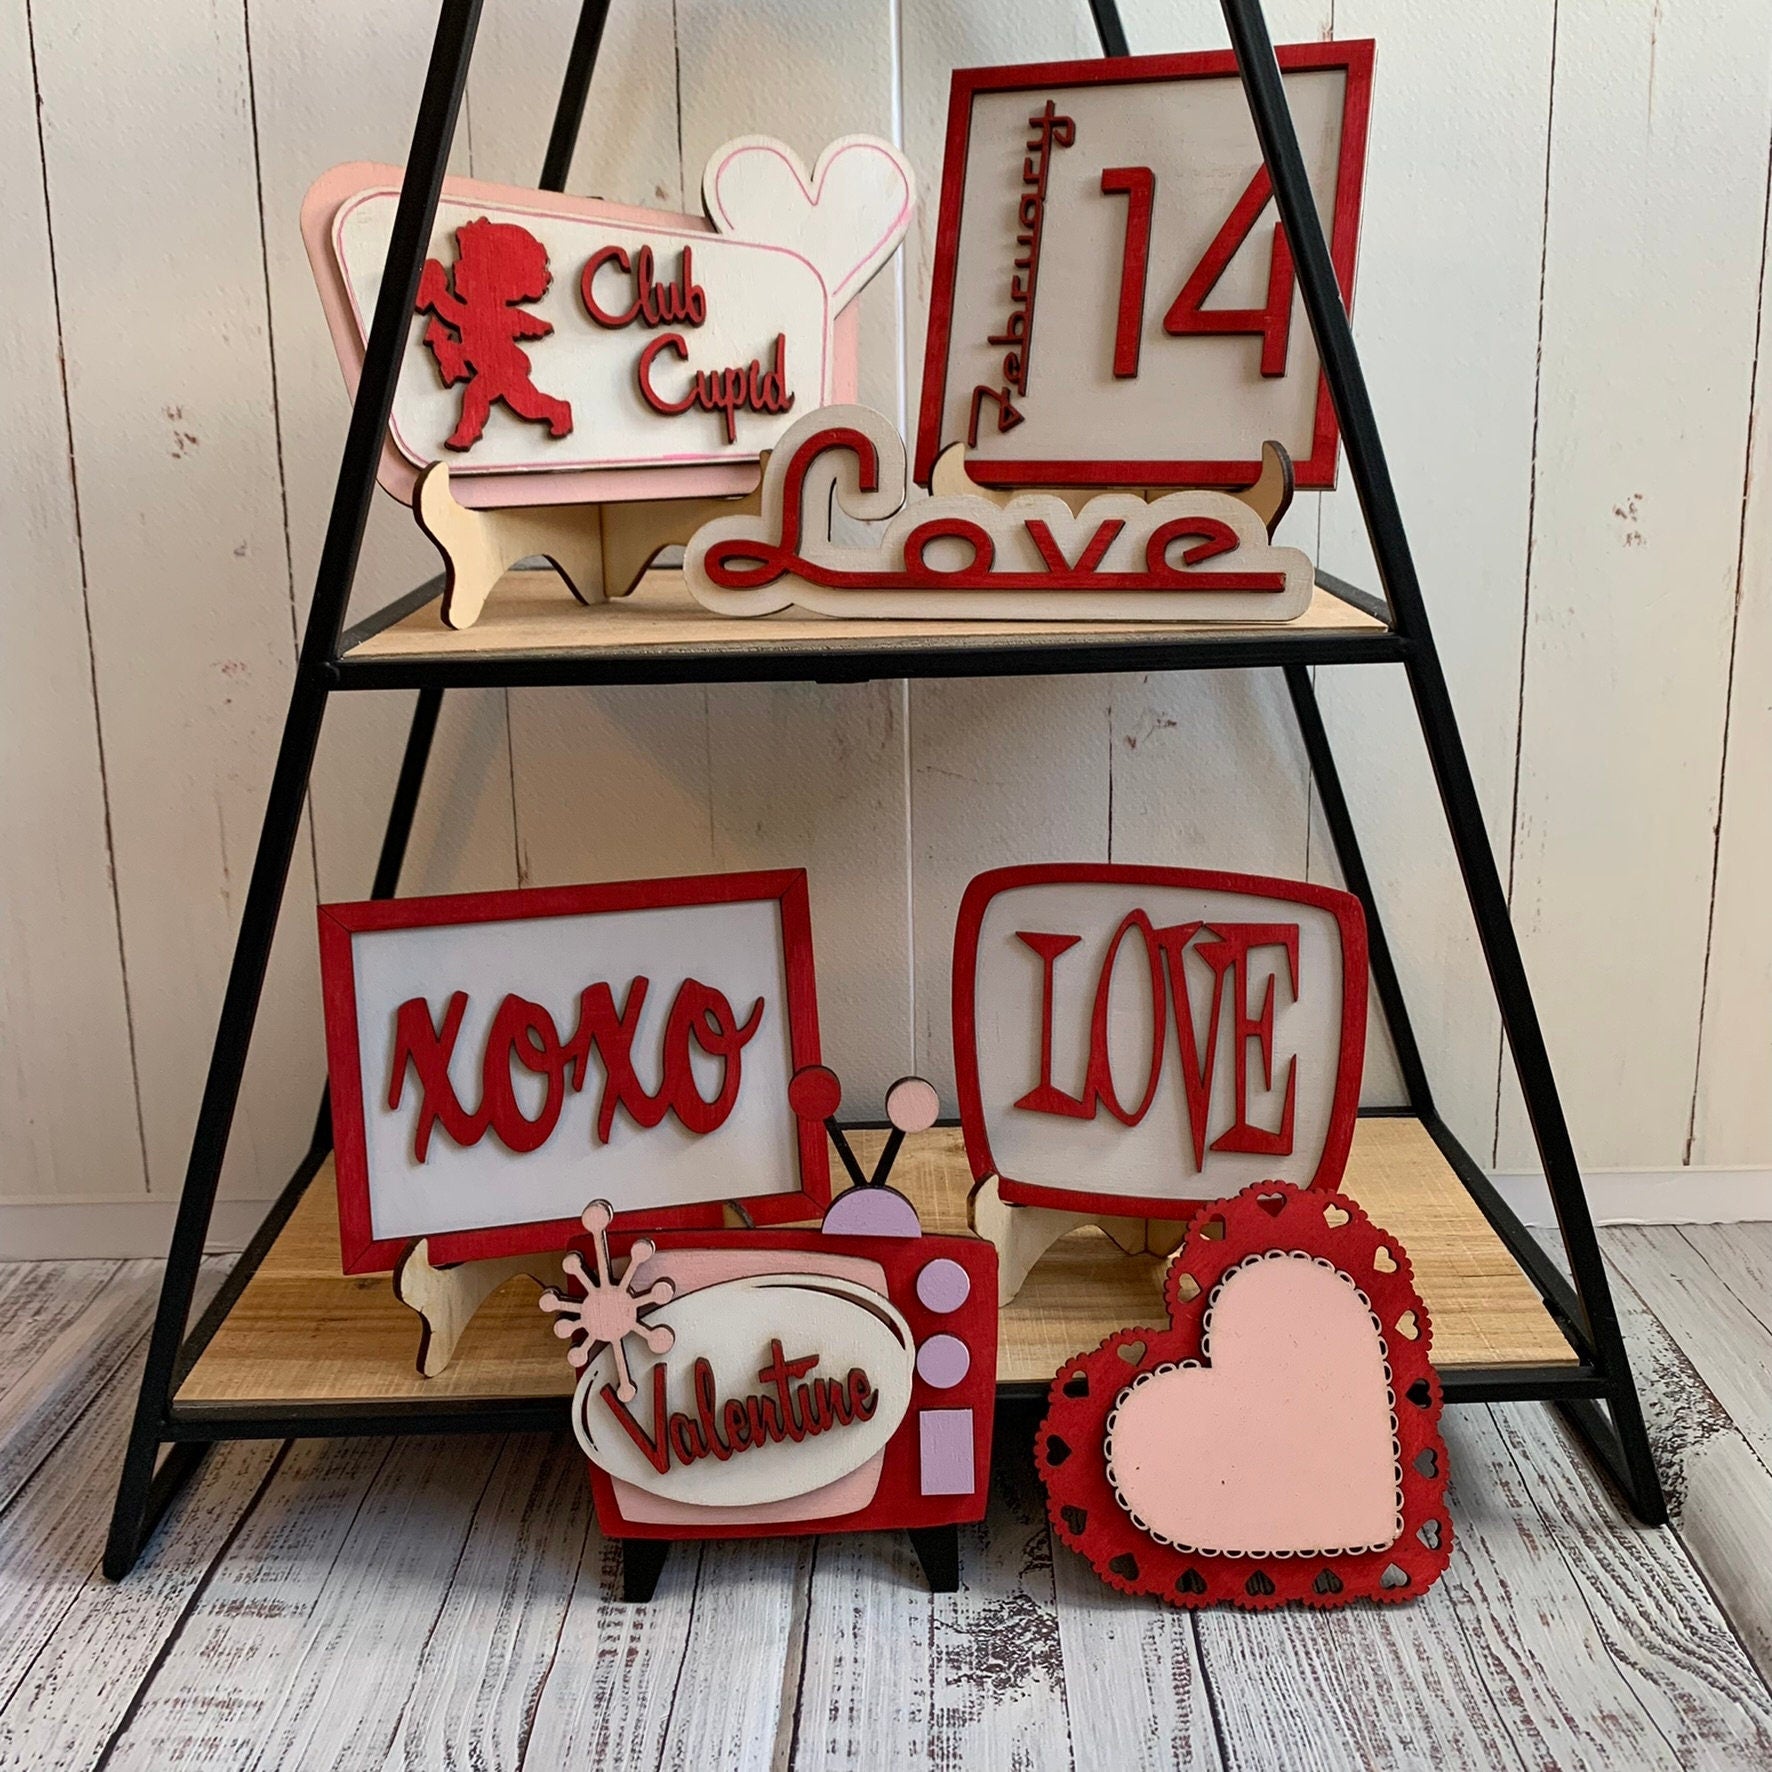 Retro Valentine's Day Tiered Tray Decor - Laser Cut Wood Painted, Mid Century Modern, Vintage Style Decorations